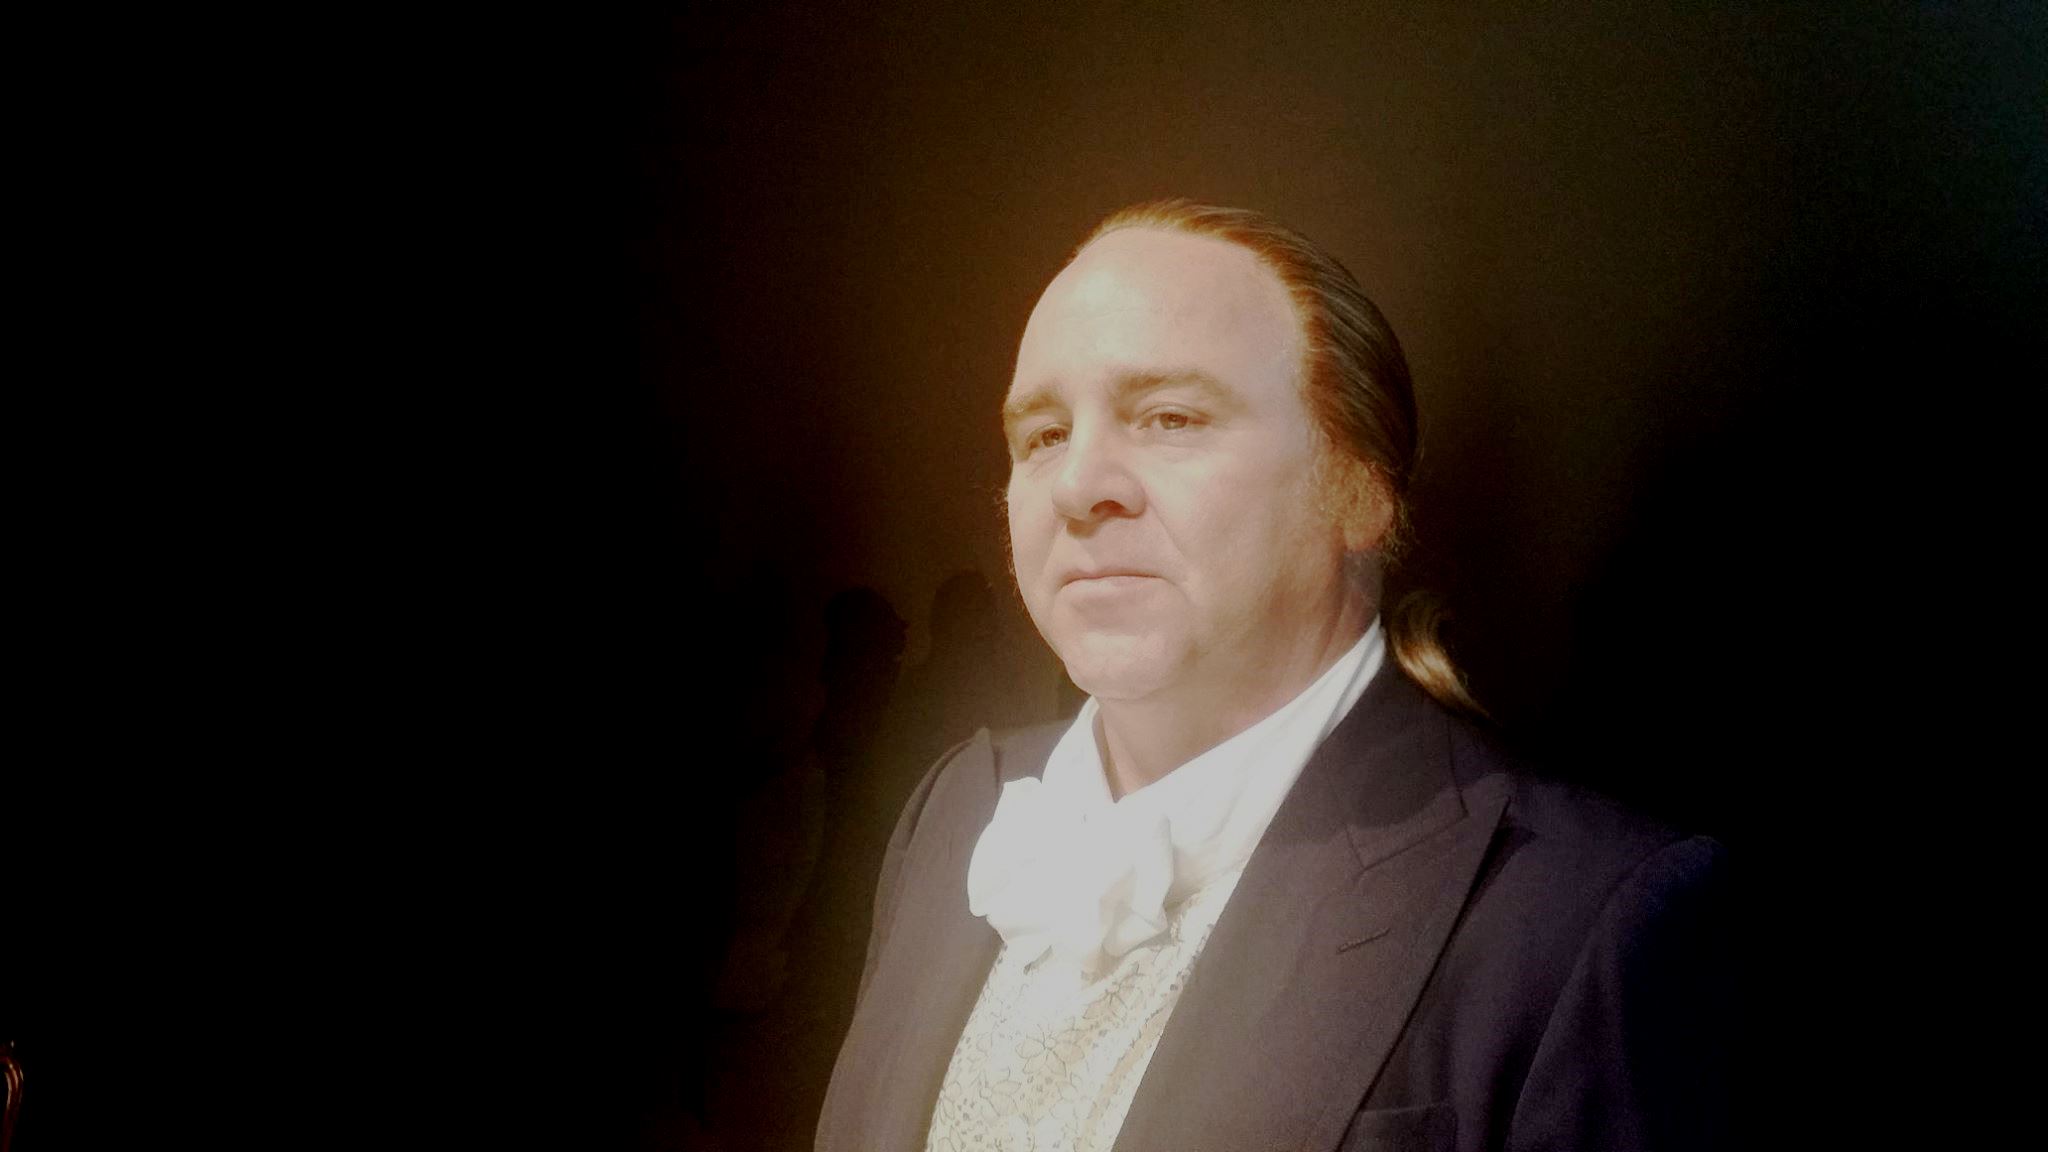 Dean Dawson is pictured here as Aaron Burr for the EBS television drama, Secret of Supremacy.